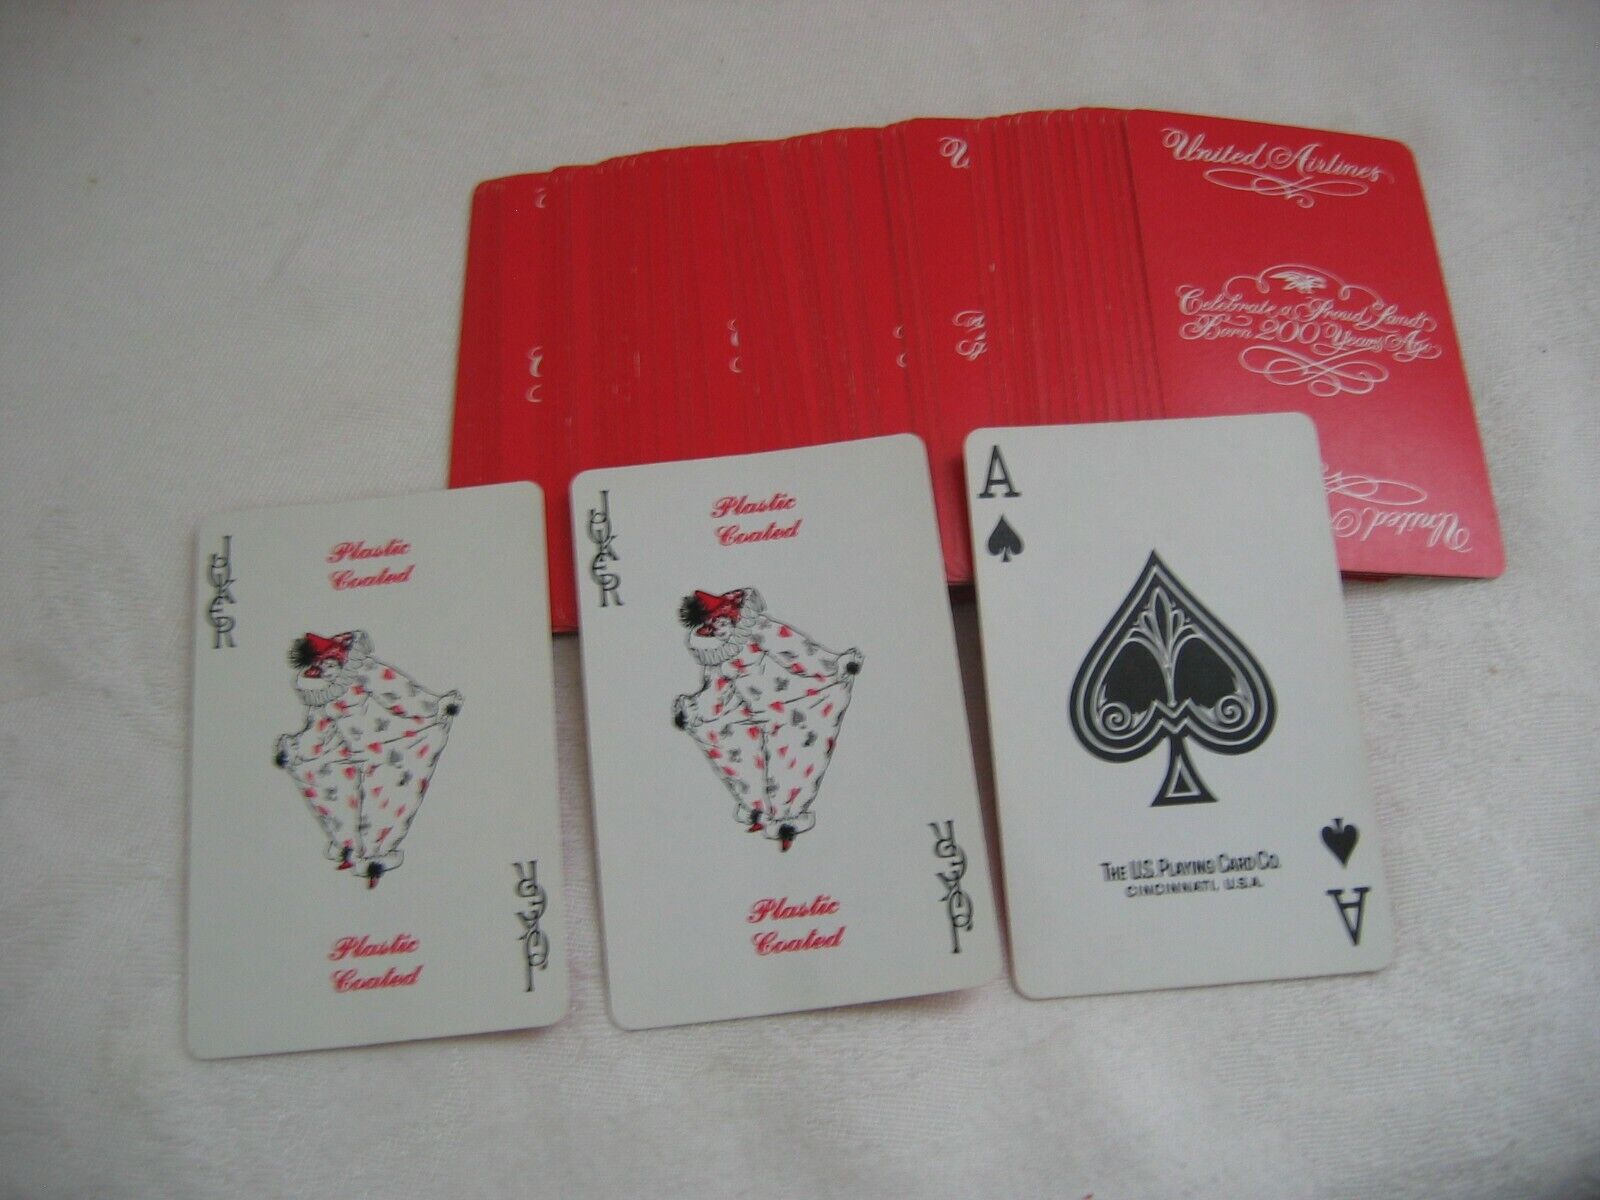 1976 UNITED AIRLINES Bicentennial Playing Cards Complete w/2 Jokers